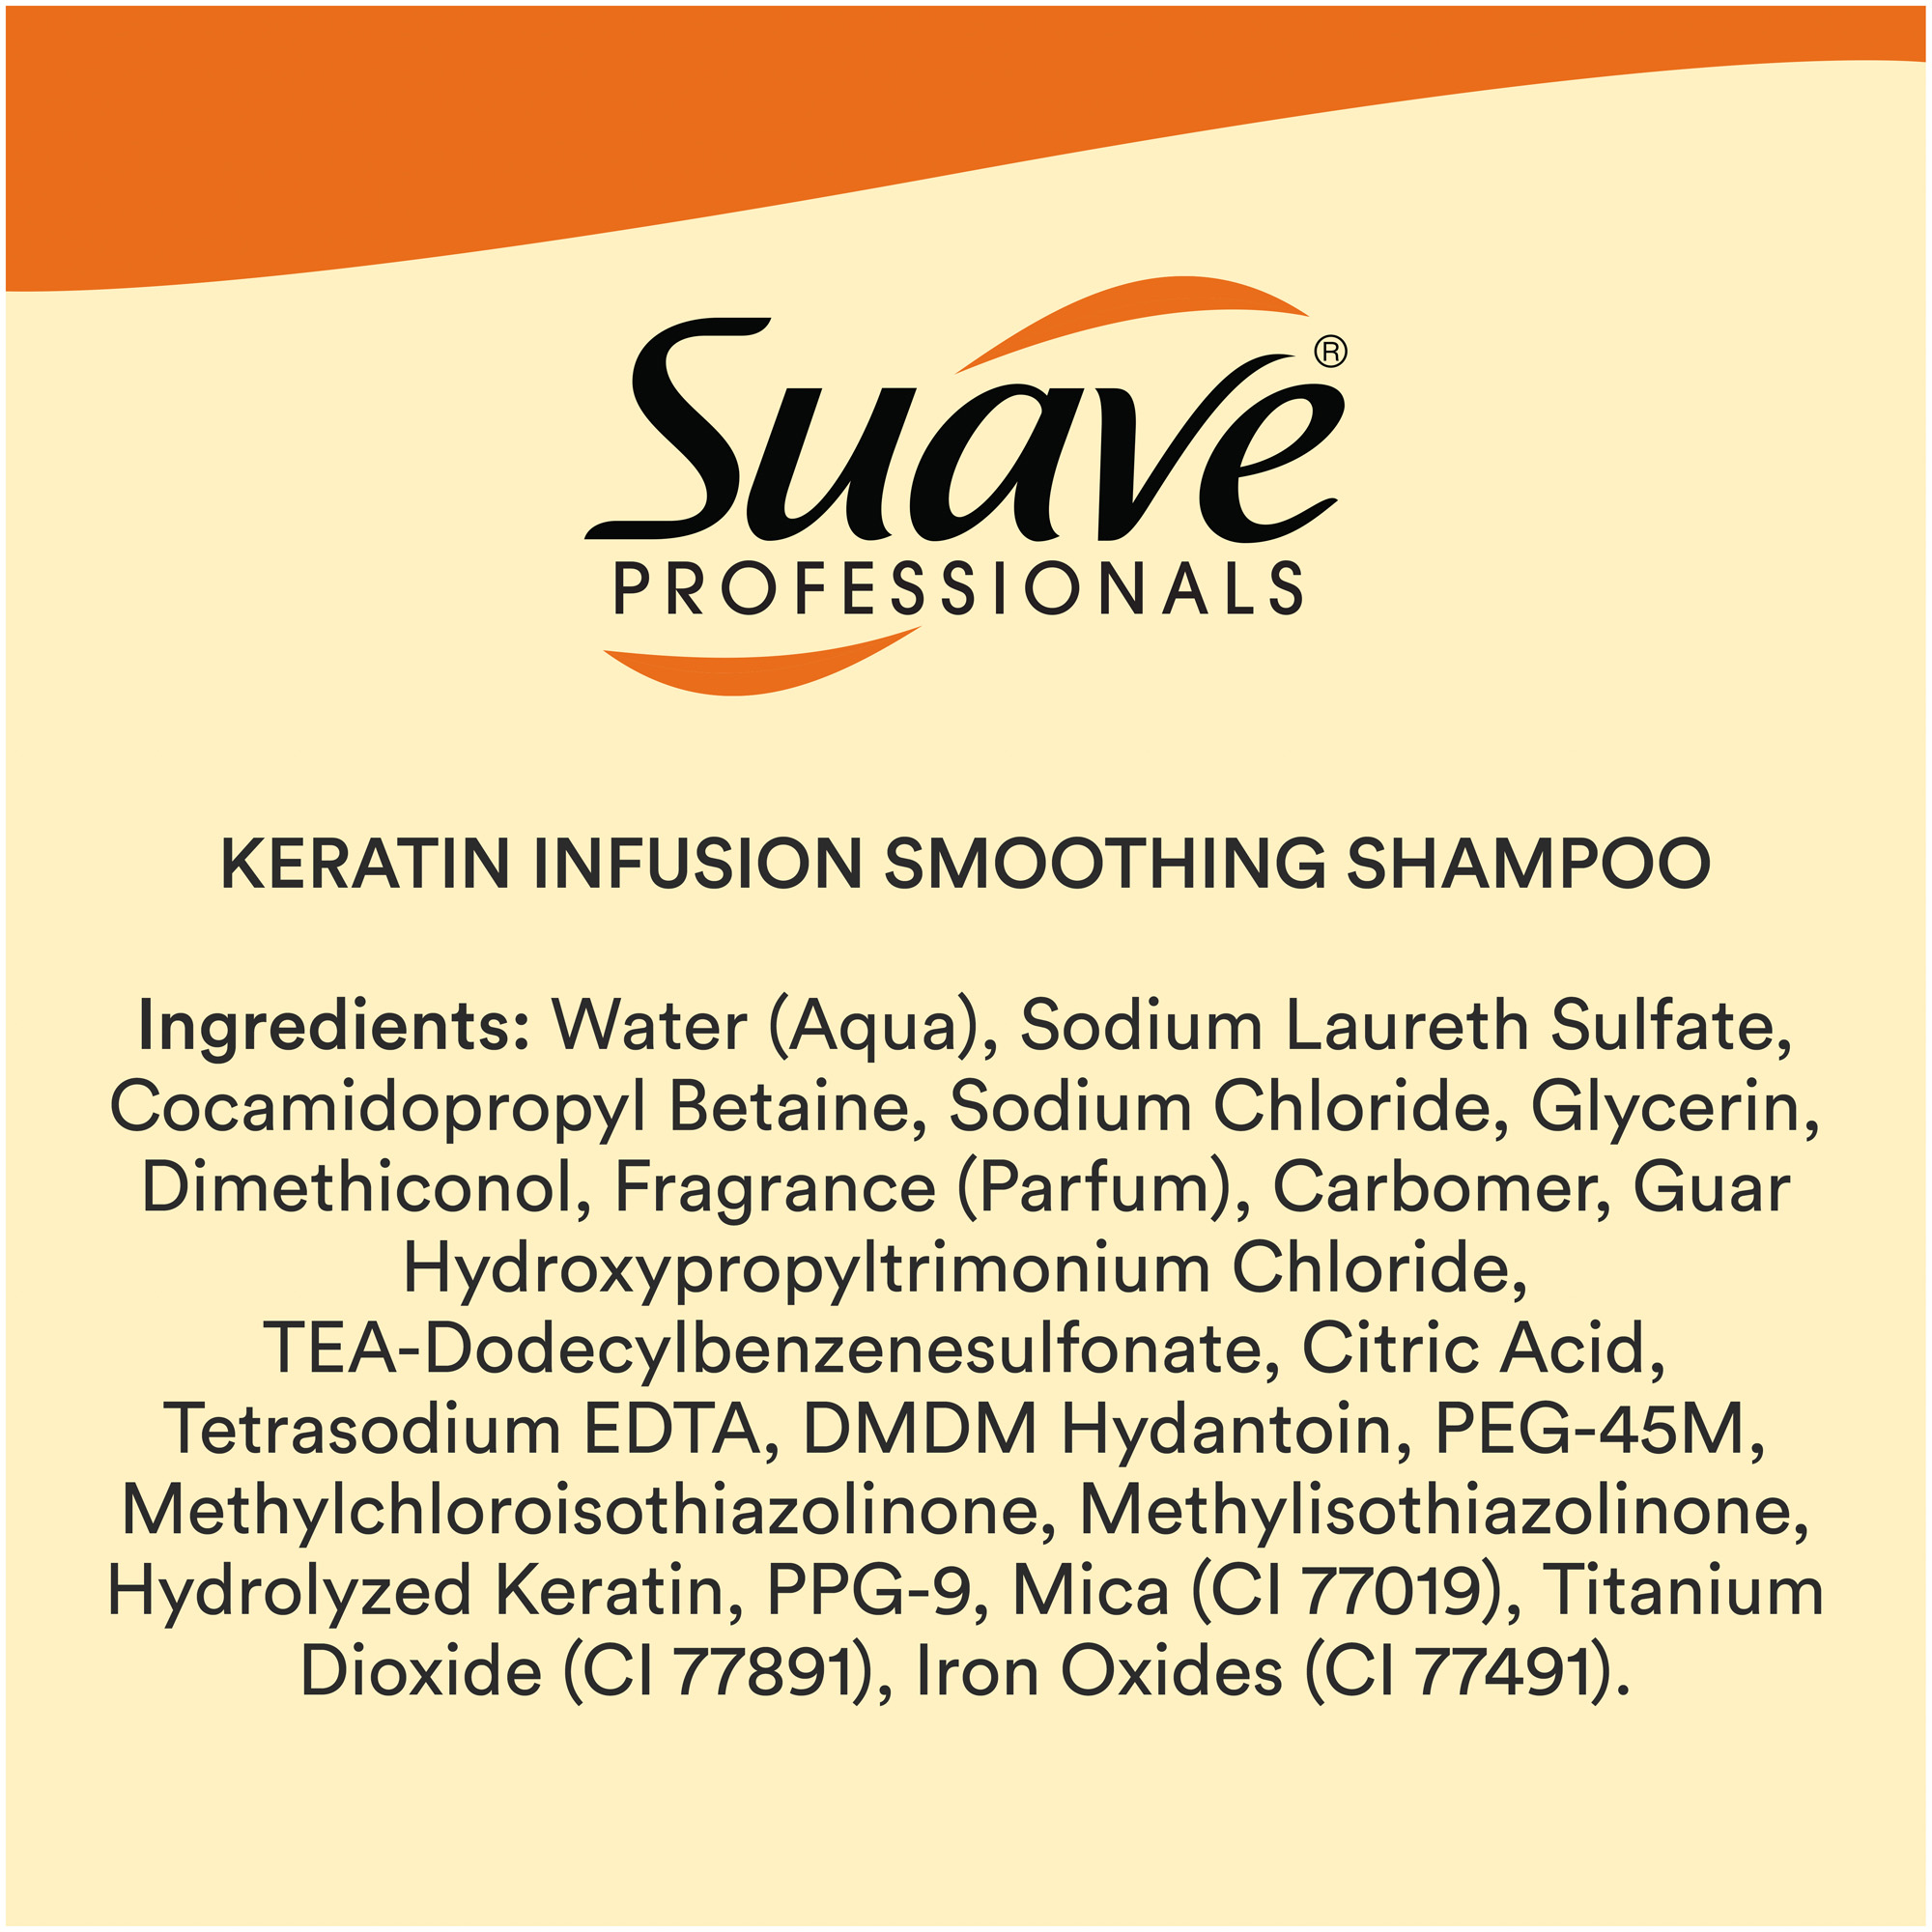 Suave Professionals Frizz Control Moisturizing Daily Shampoo & Conditioner with Keratin, Full Size Set, 2 Pack - image 4 of 7